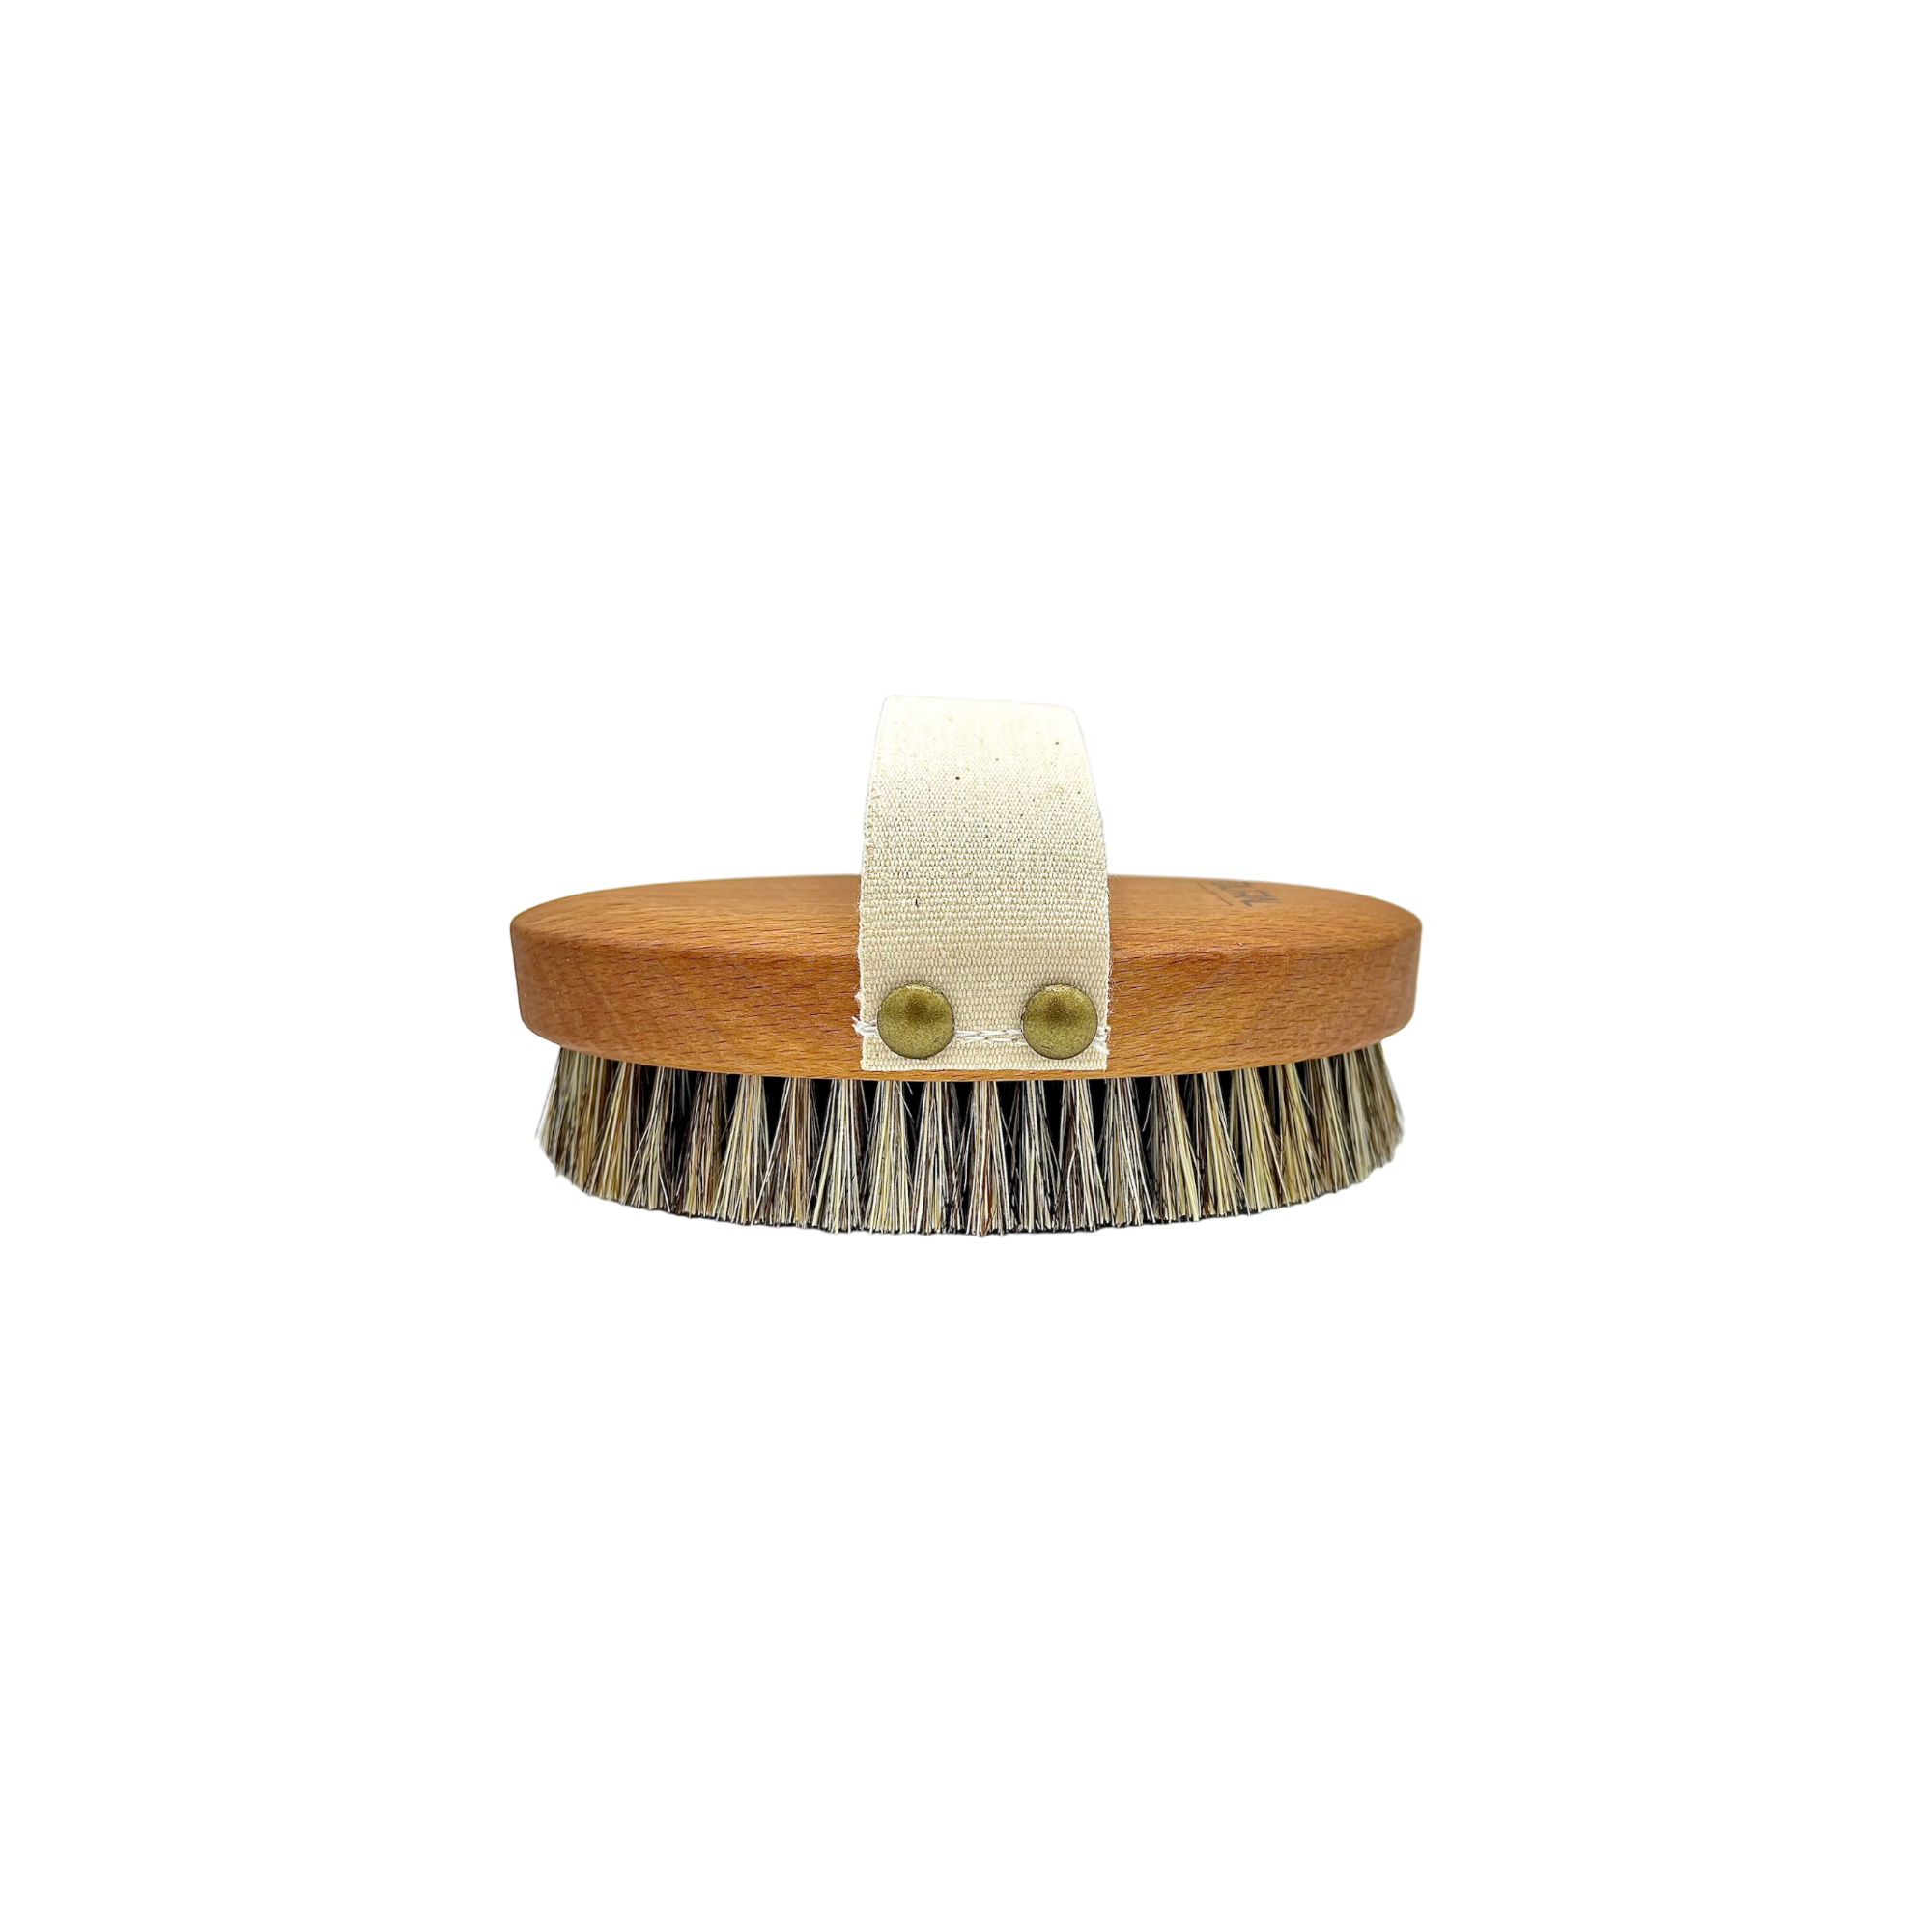 Dural Beech wood wellness brush with horse hair and Tampico fiber